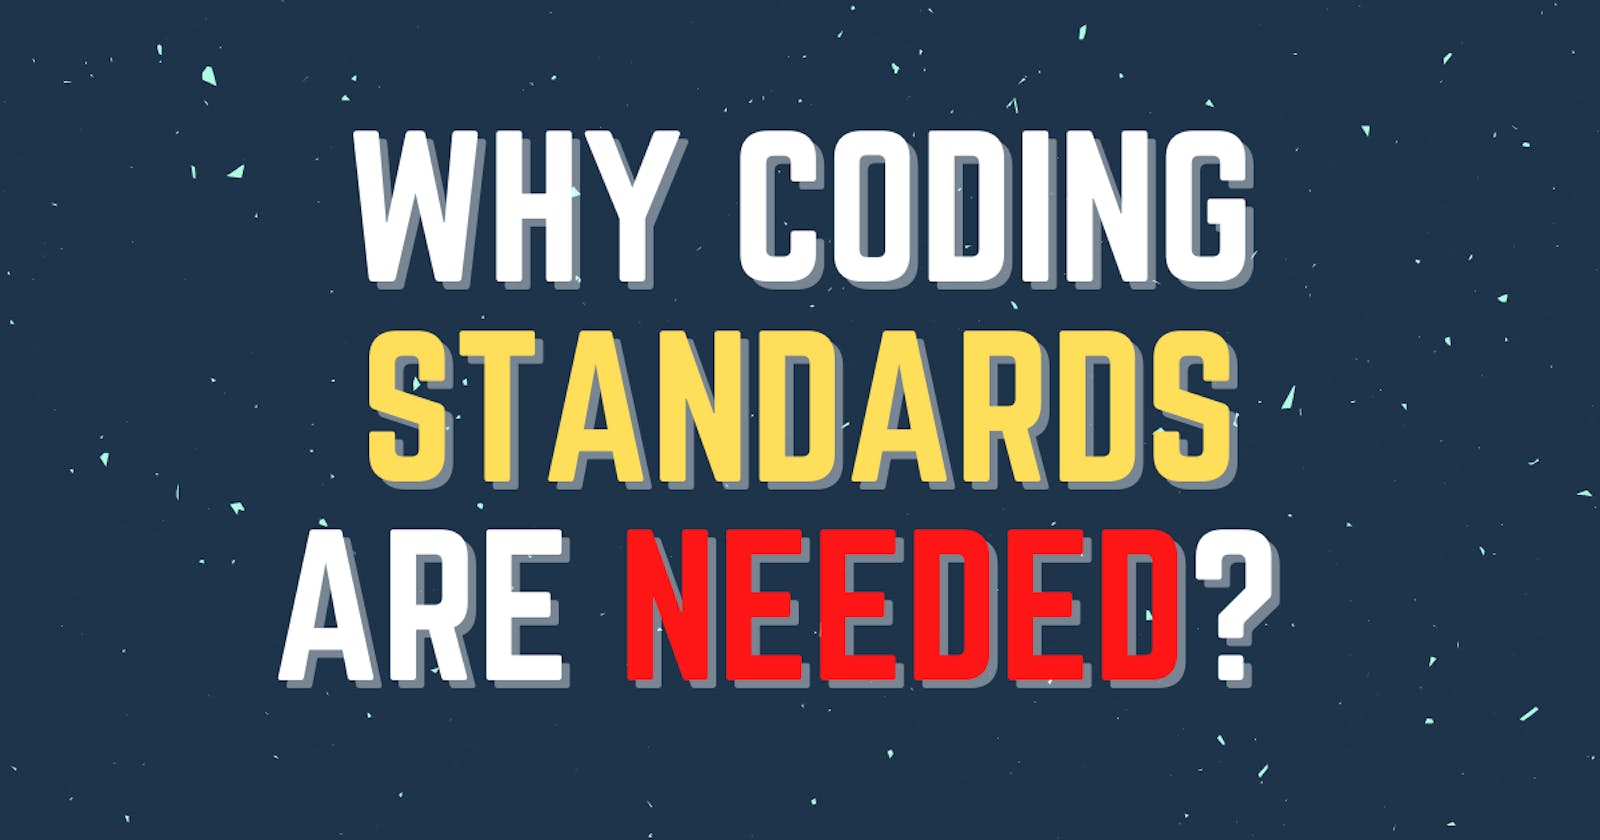 Why coding standards are needed?